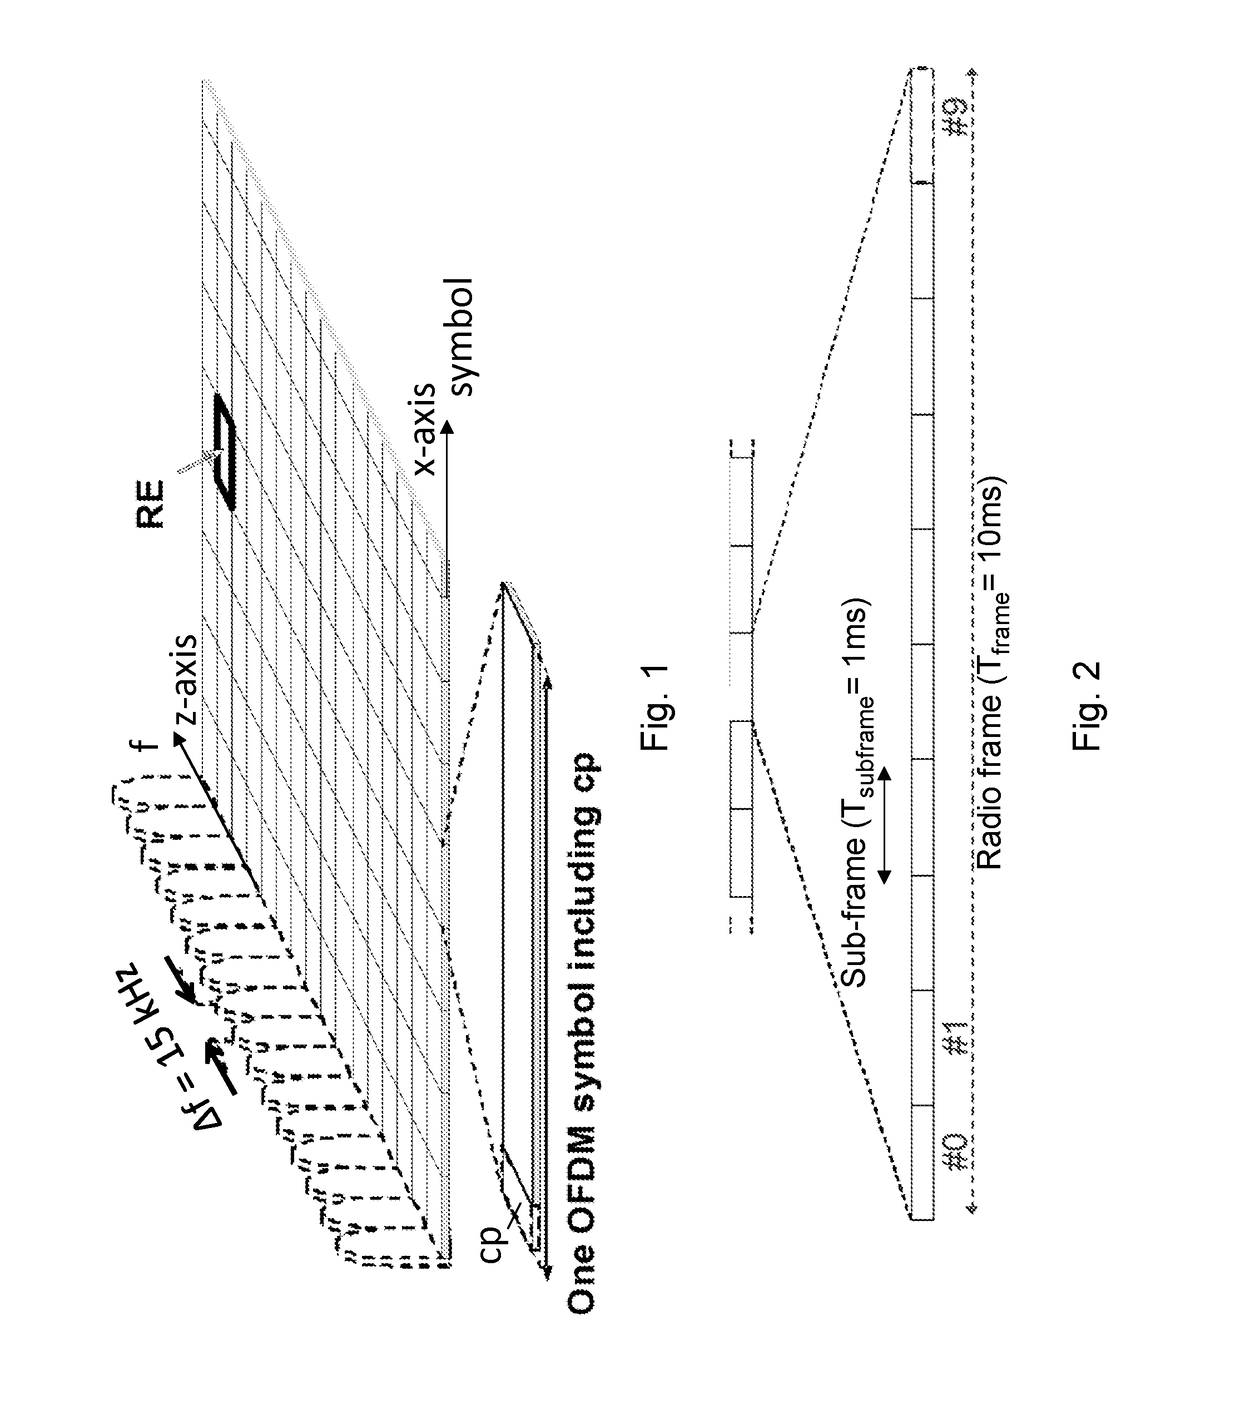 Radio access node, communication terminal and methods performed therein